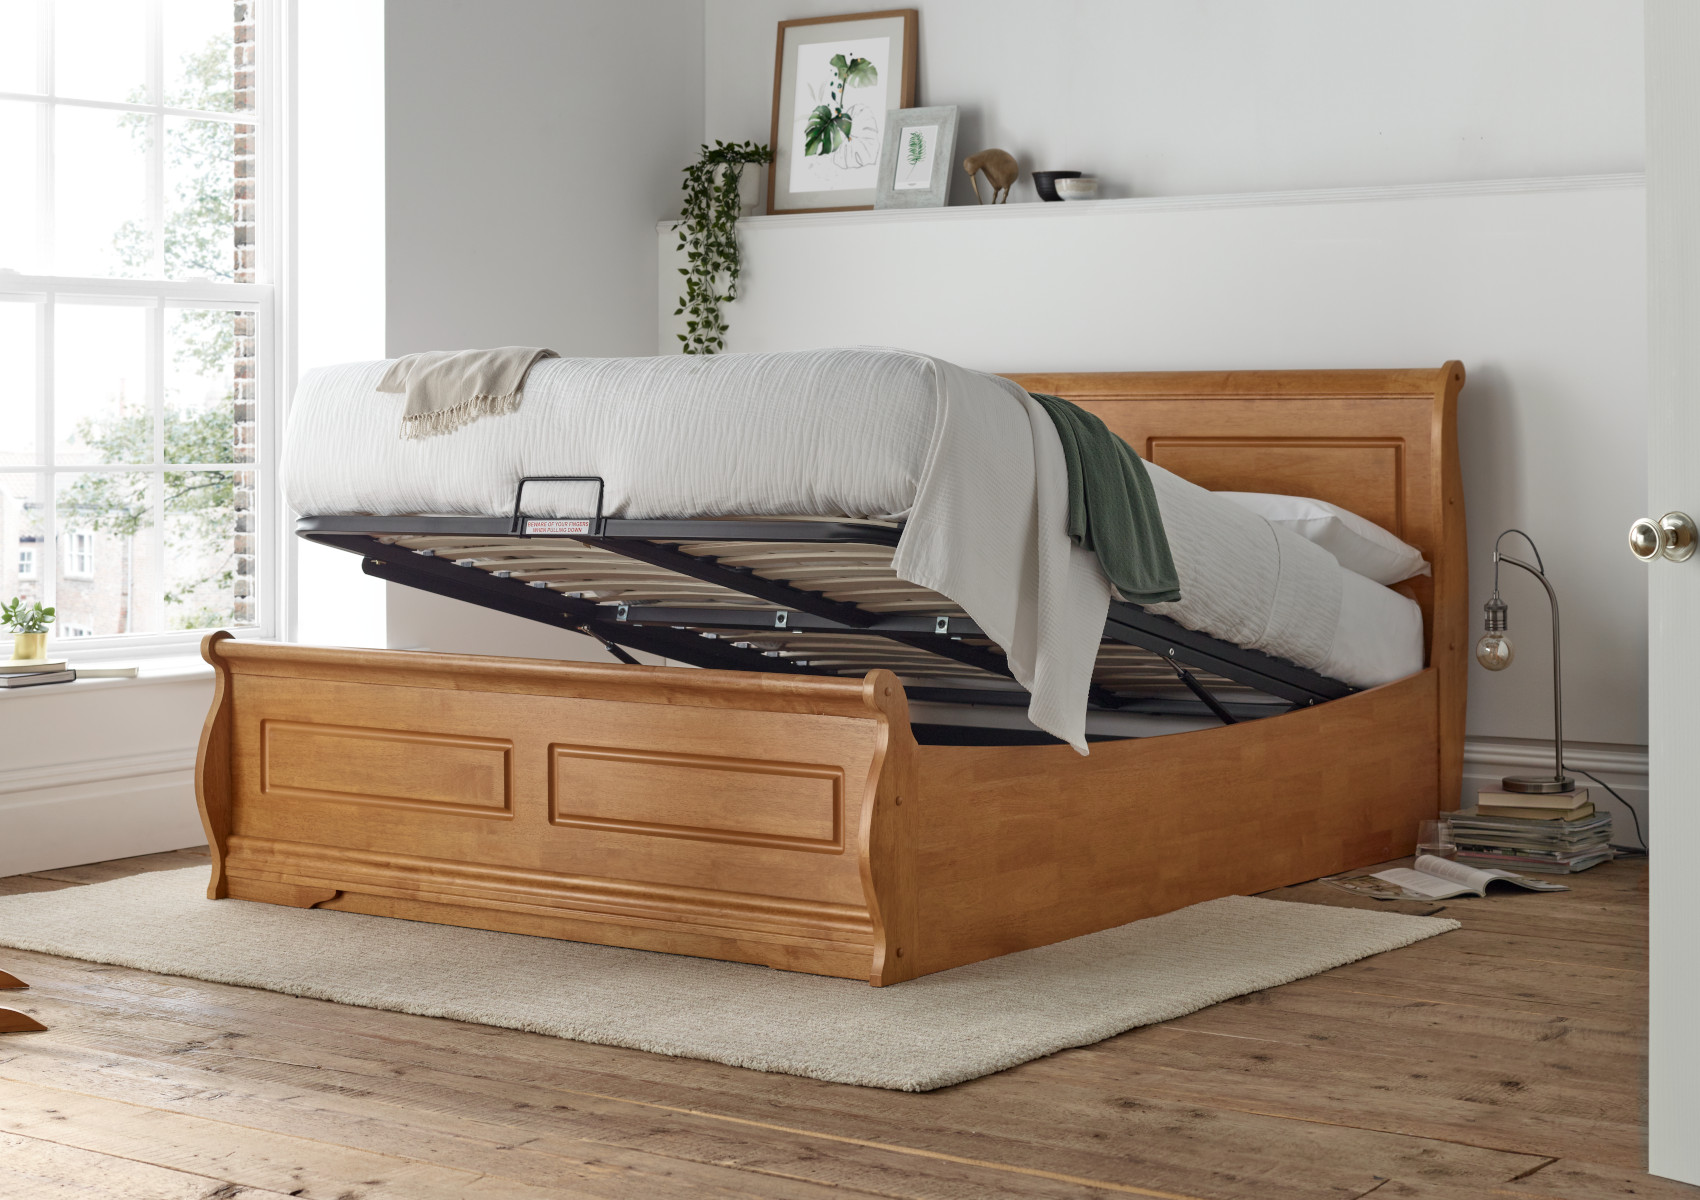 View Marseille New Oak Wooden Ottoman Storage Bed Frame Only Time4Sleep information